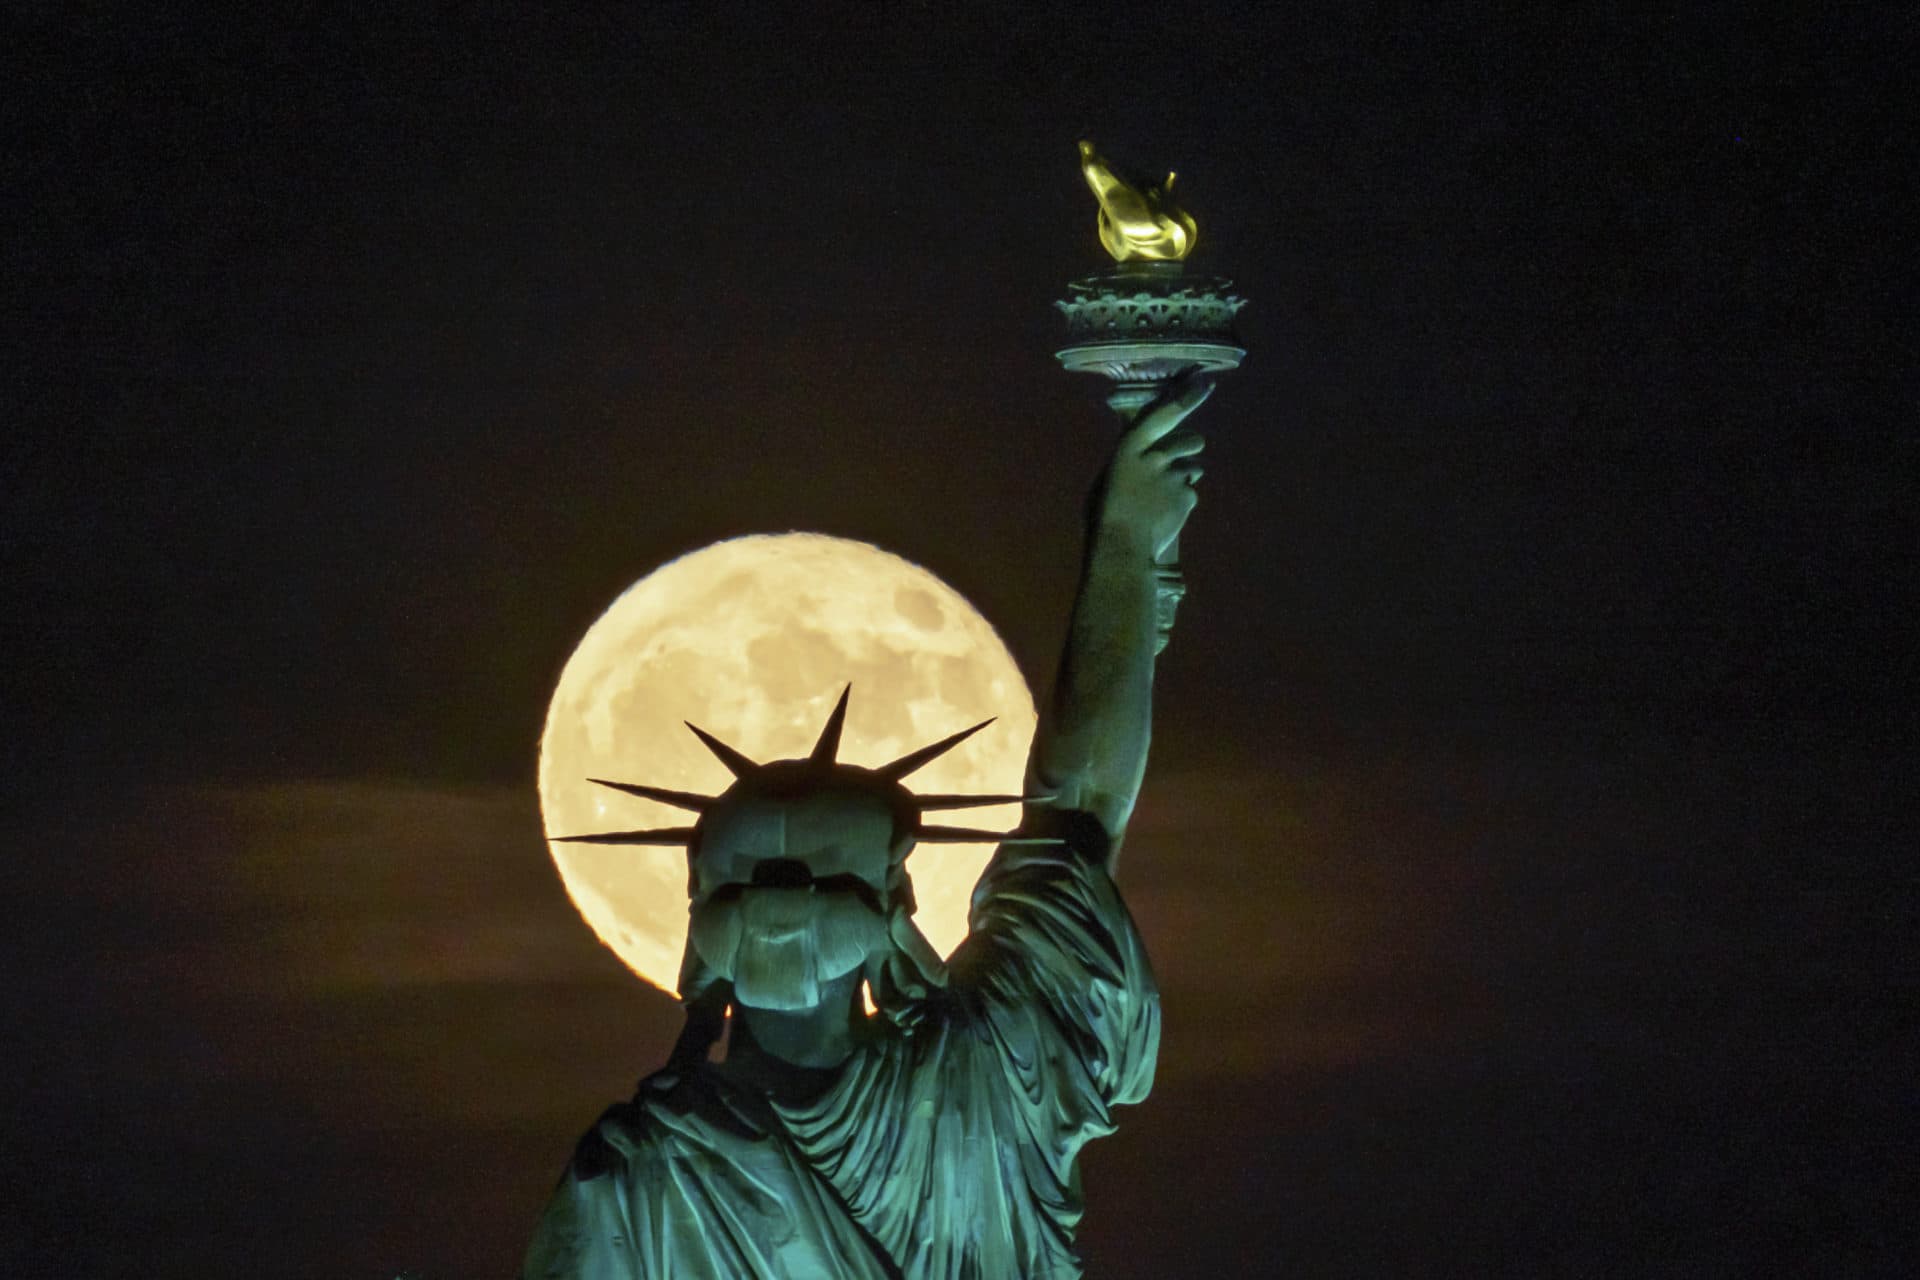 The strawberry supermoon rises in front of the Statue of Liberty in New York. (J. David Ake/AP)